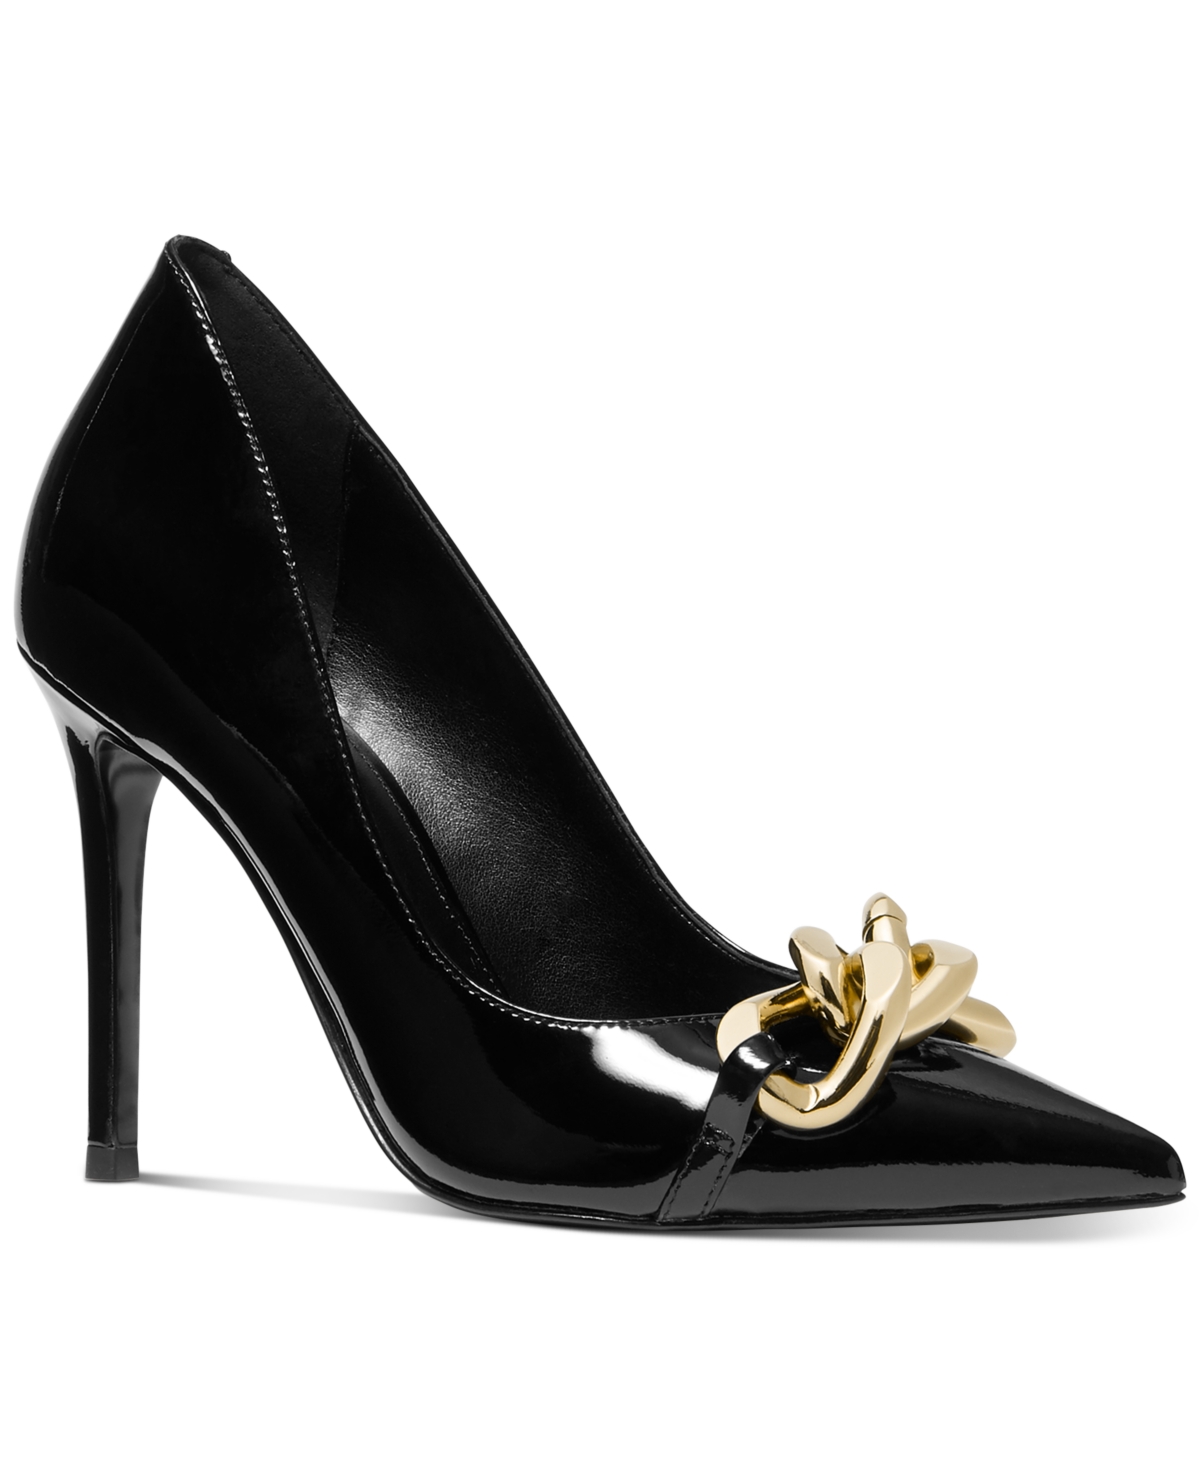 UPC 195512621154 product image for Michael Michael Kors Women's Scarlett Pointed-Toe Chain Pumps Women's Shoes | upcitemdb.com